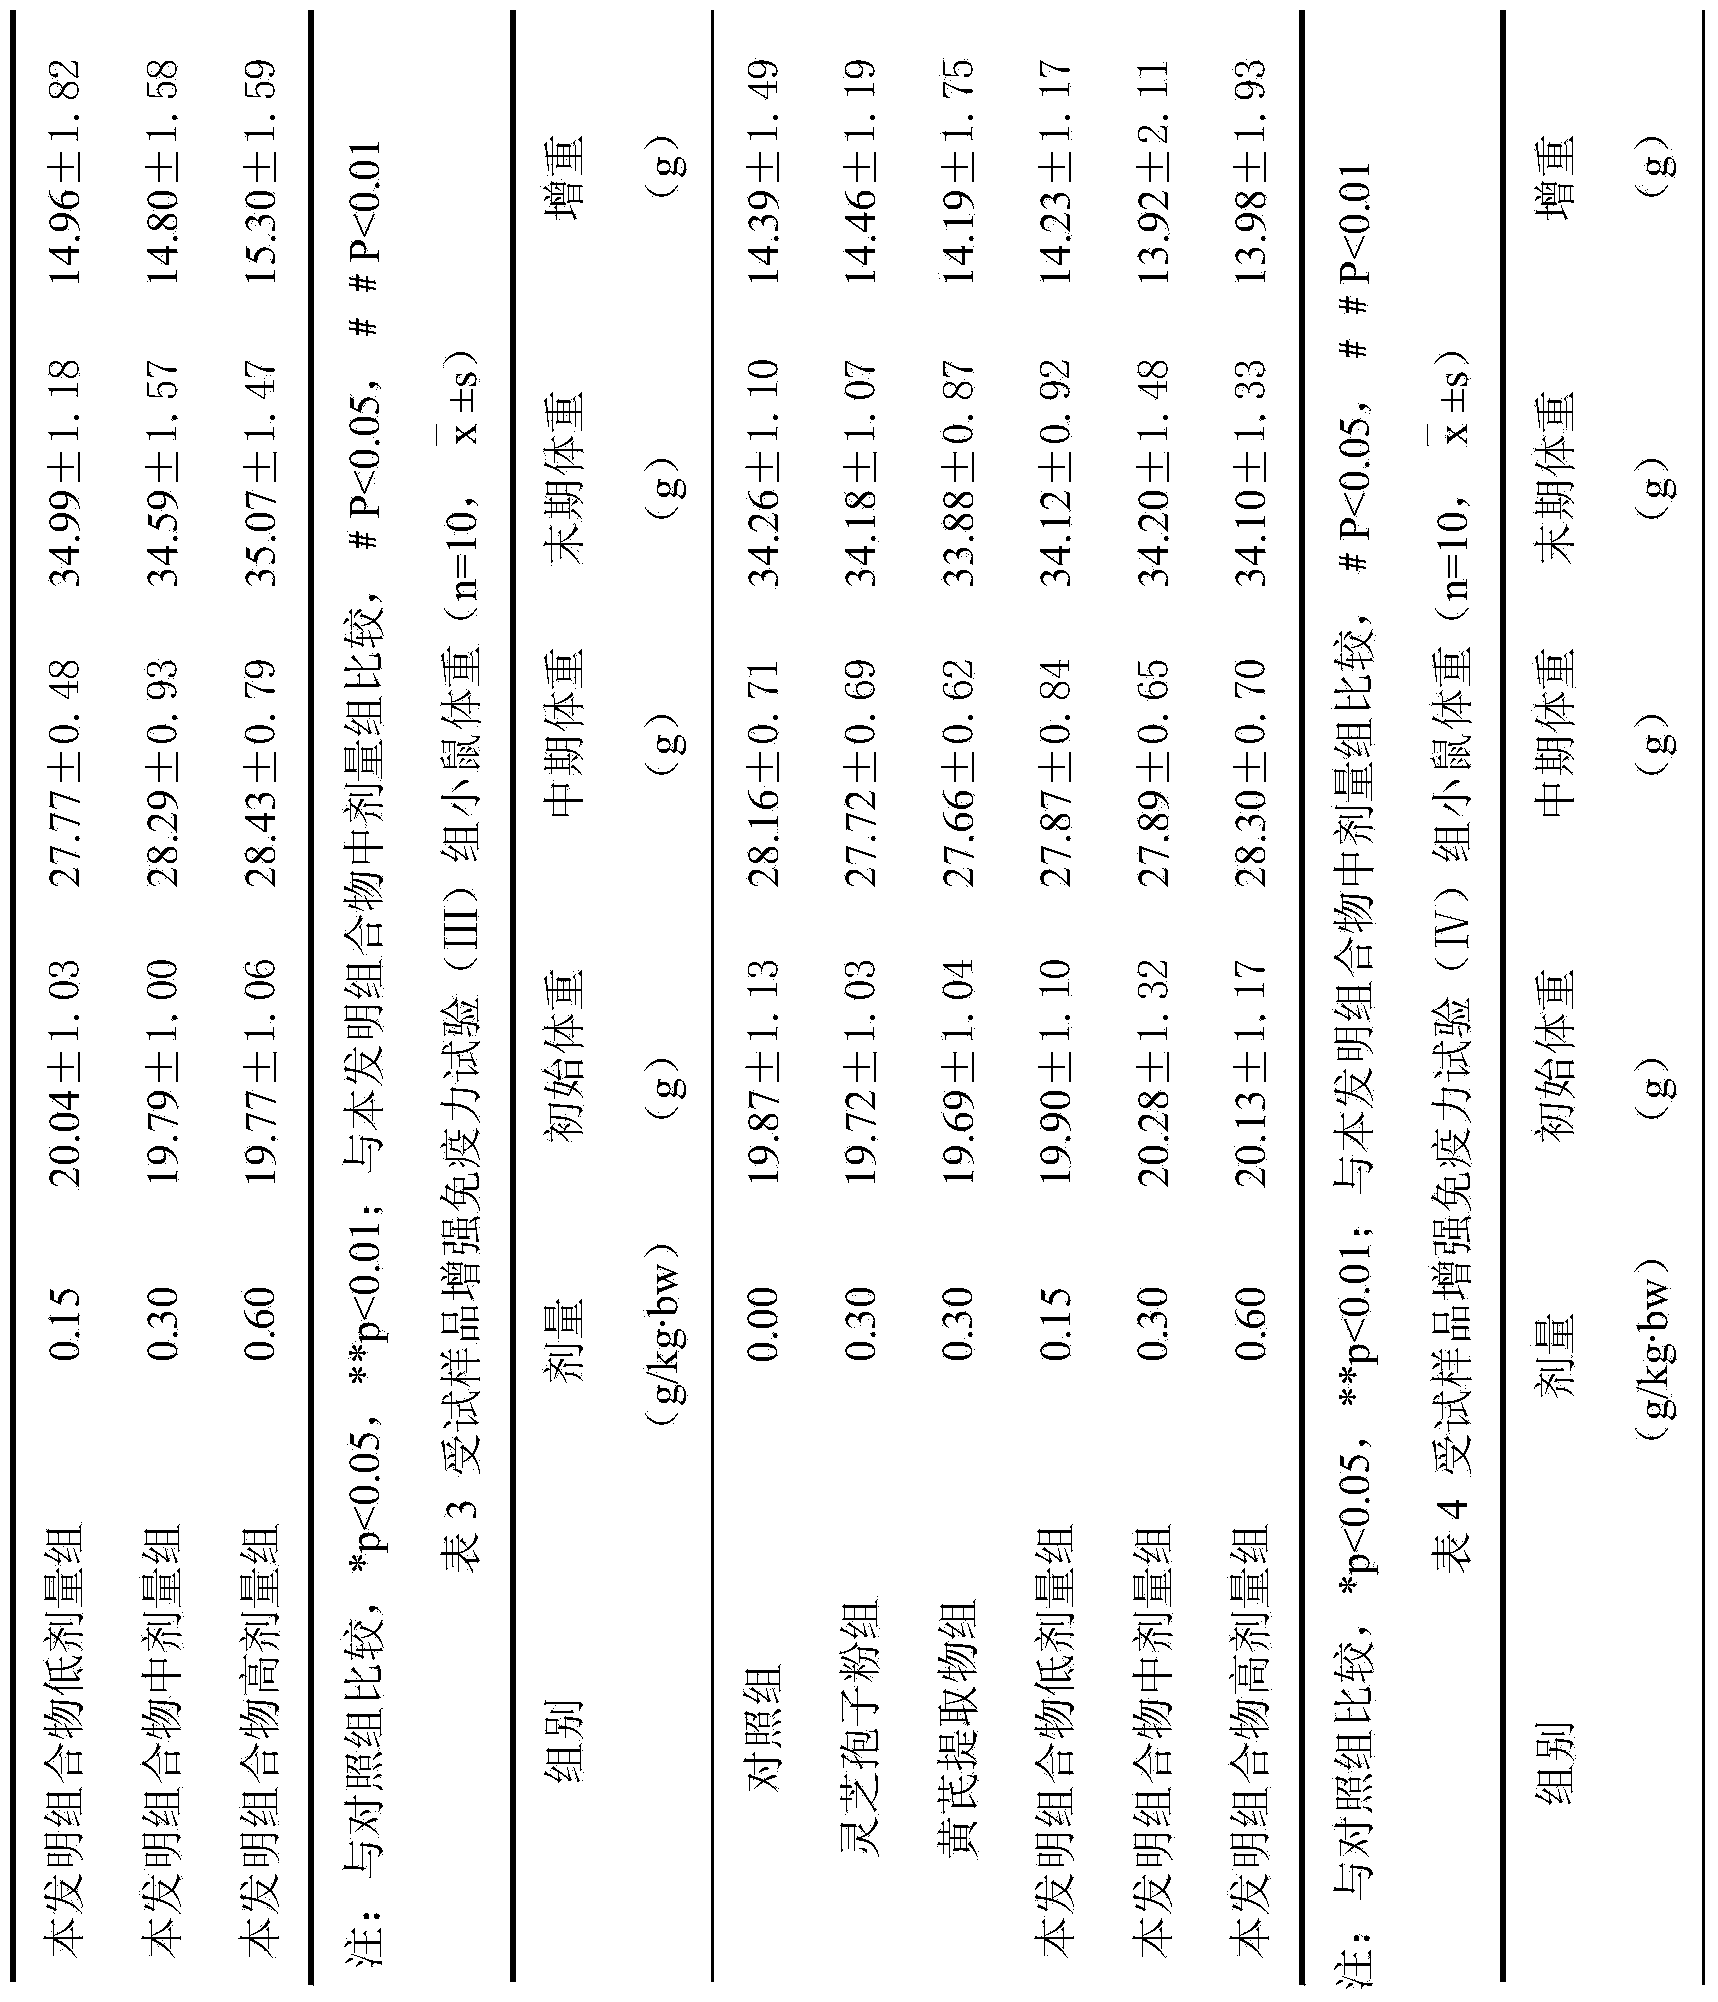 Composition for strengthening immunity function of organism and preparation method thereof